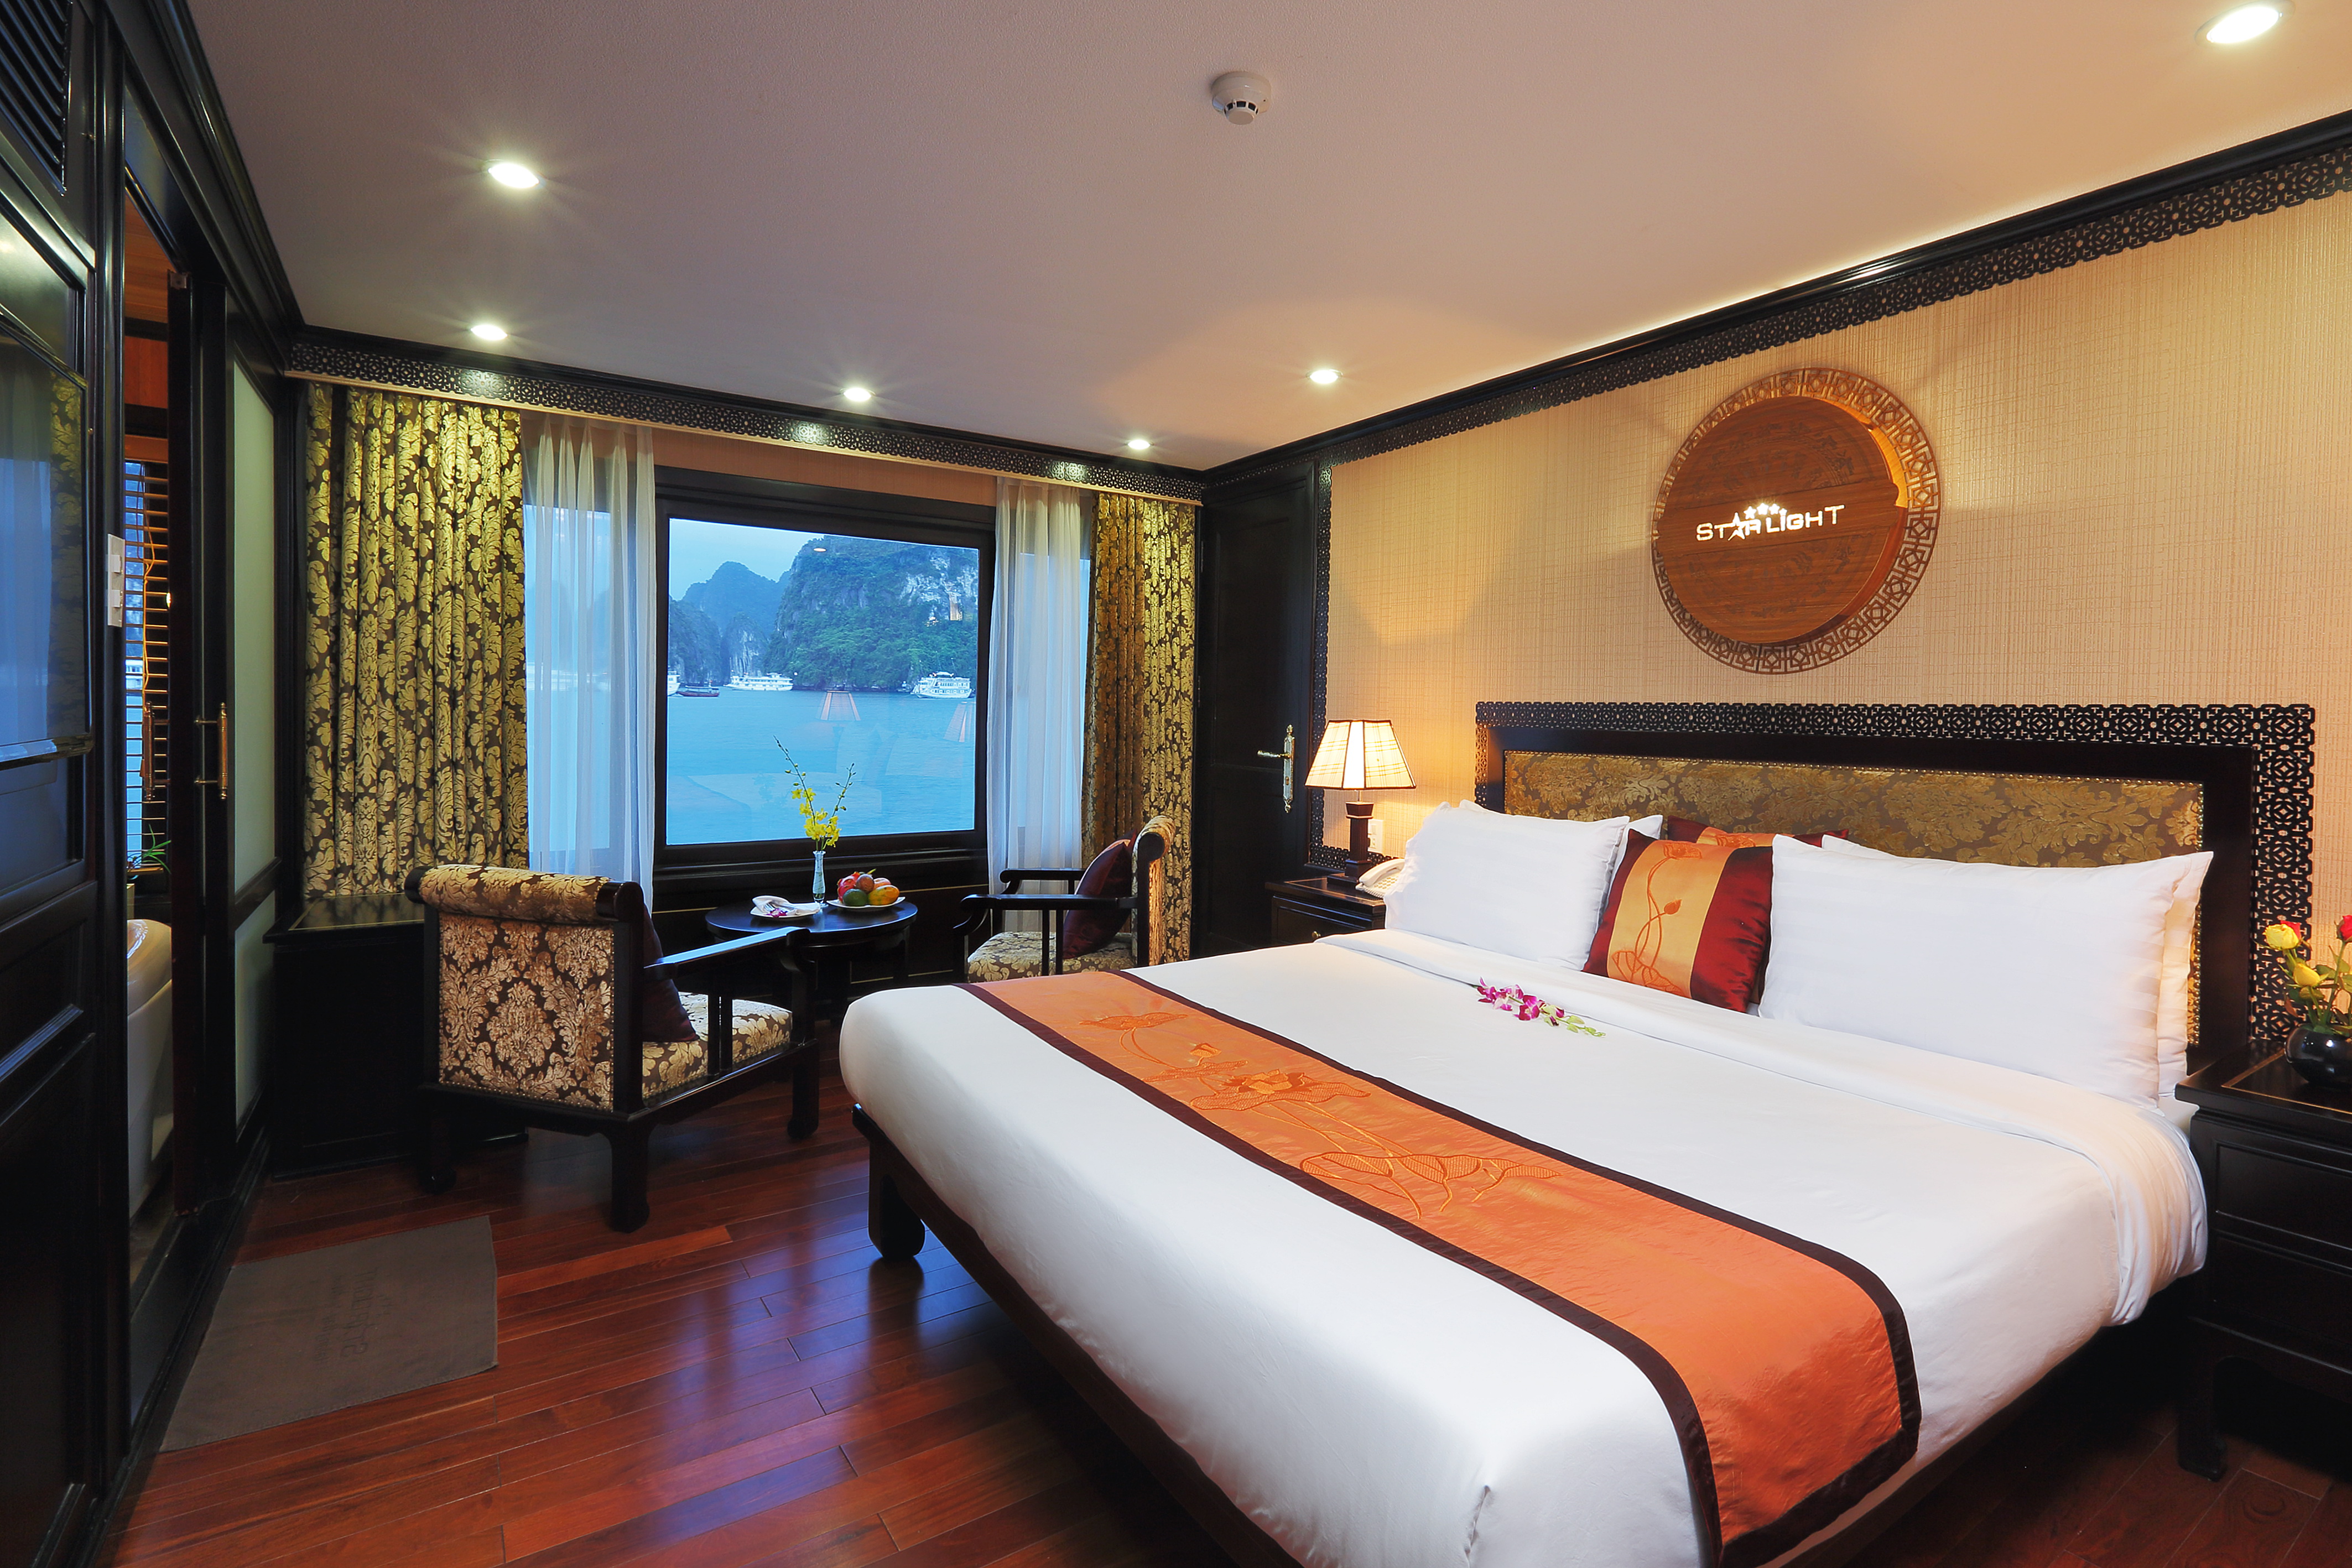 Deluxe Cabin on Starlight Cruise halong bay